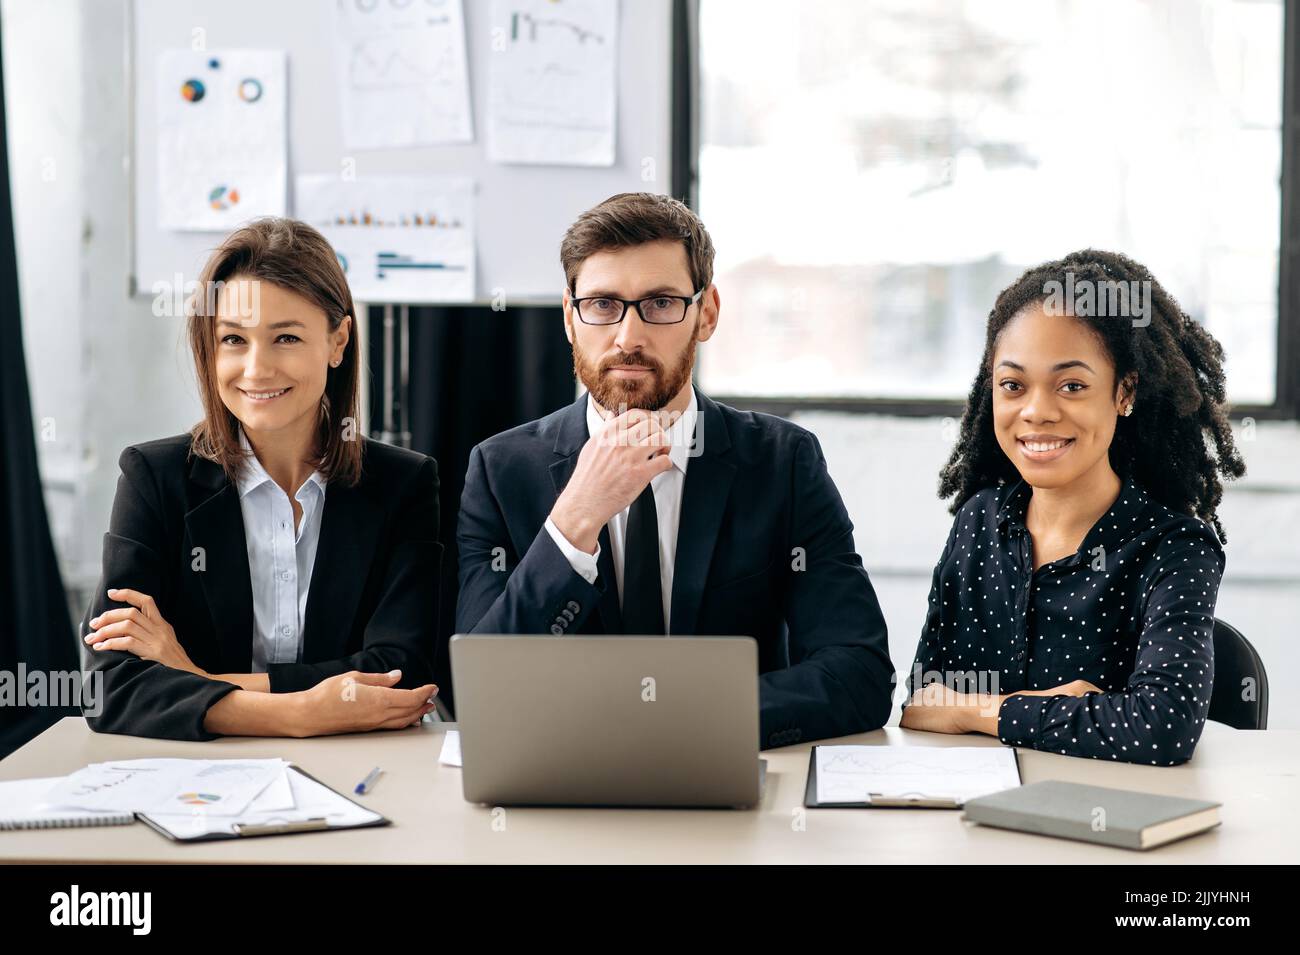 Successful business people. Multiracial influential business people in formal wear look at the camera, smiling. Elegant creative colleagues sitting in modern office, working together on project Stock Photo